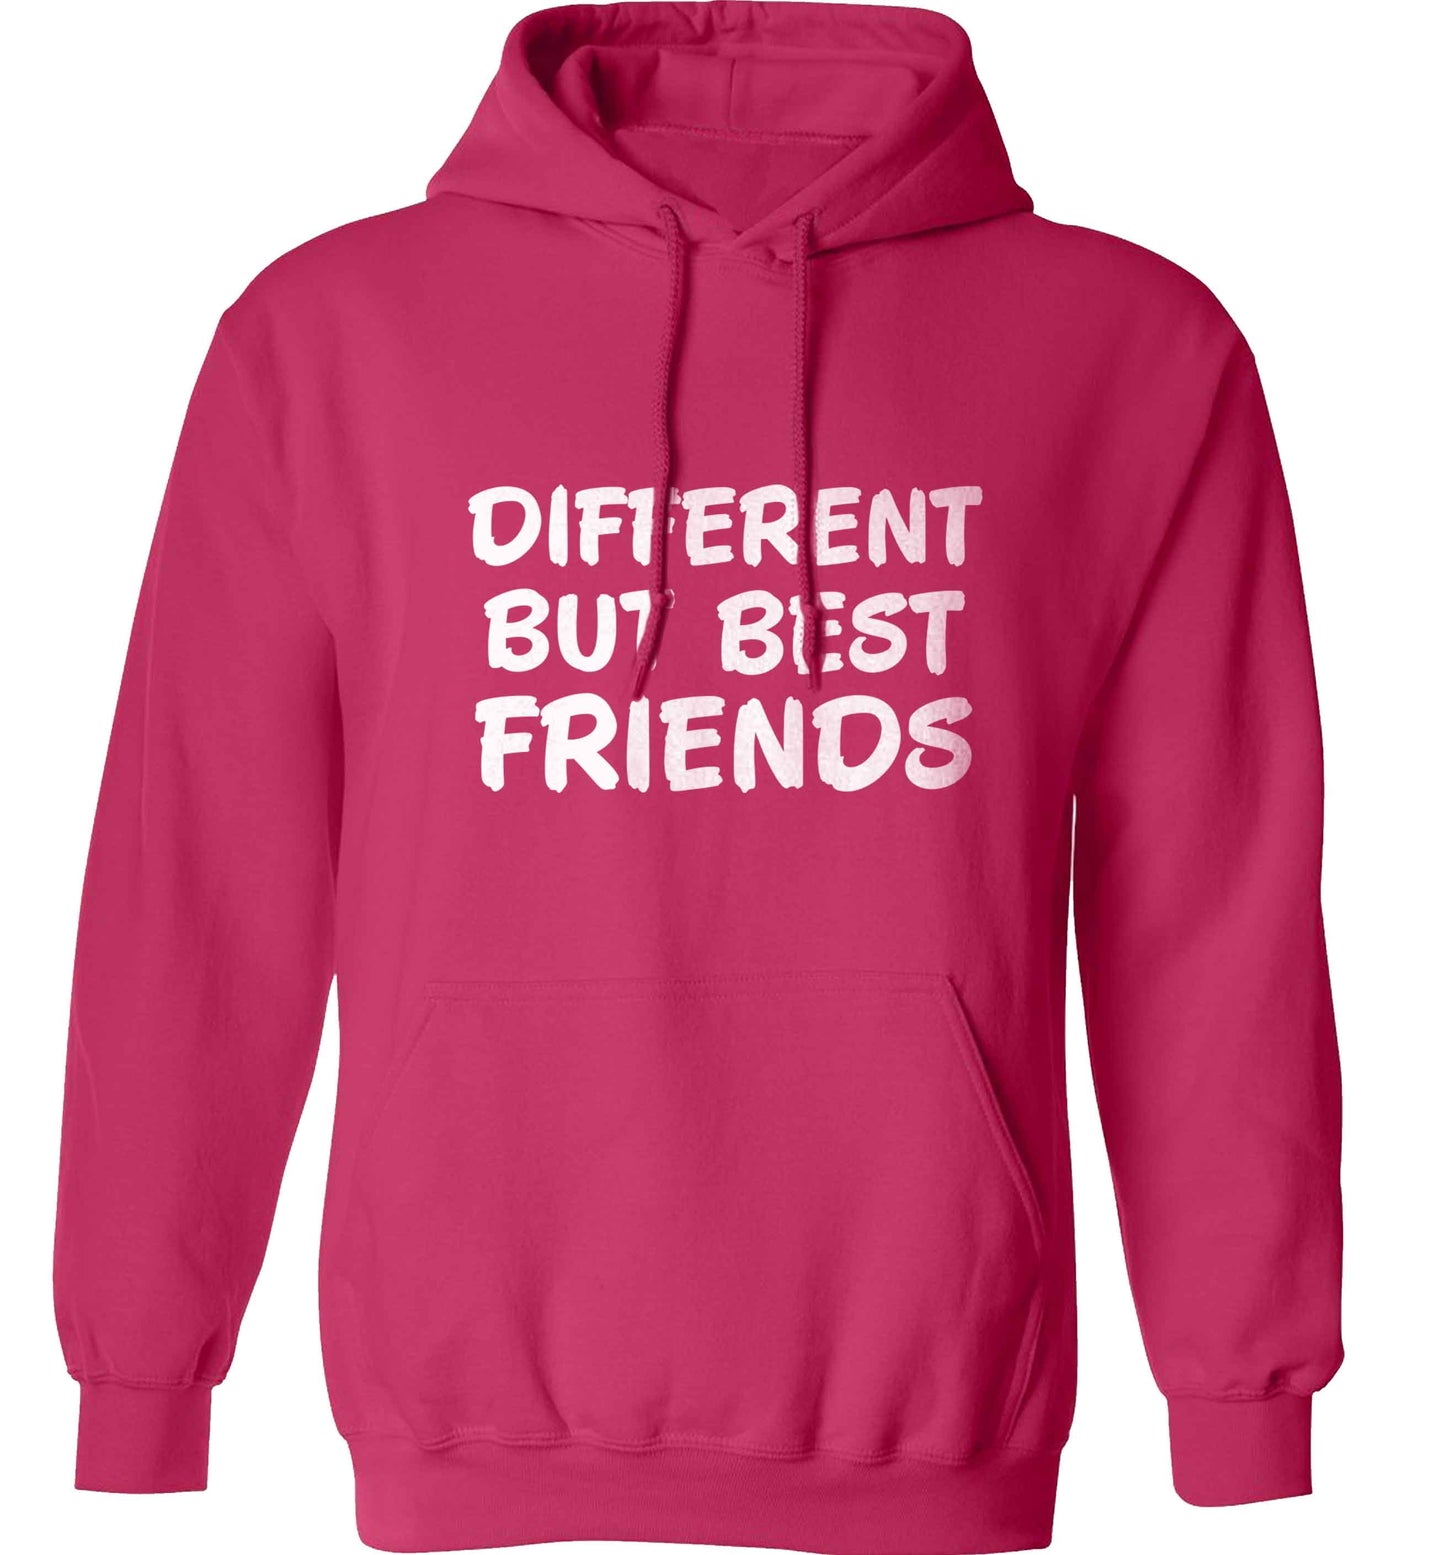 Different but best friends adults unisex pink hoodie 2XL